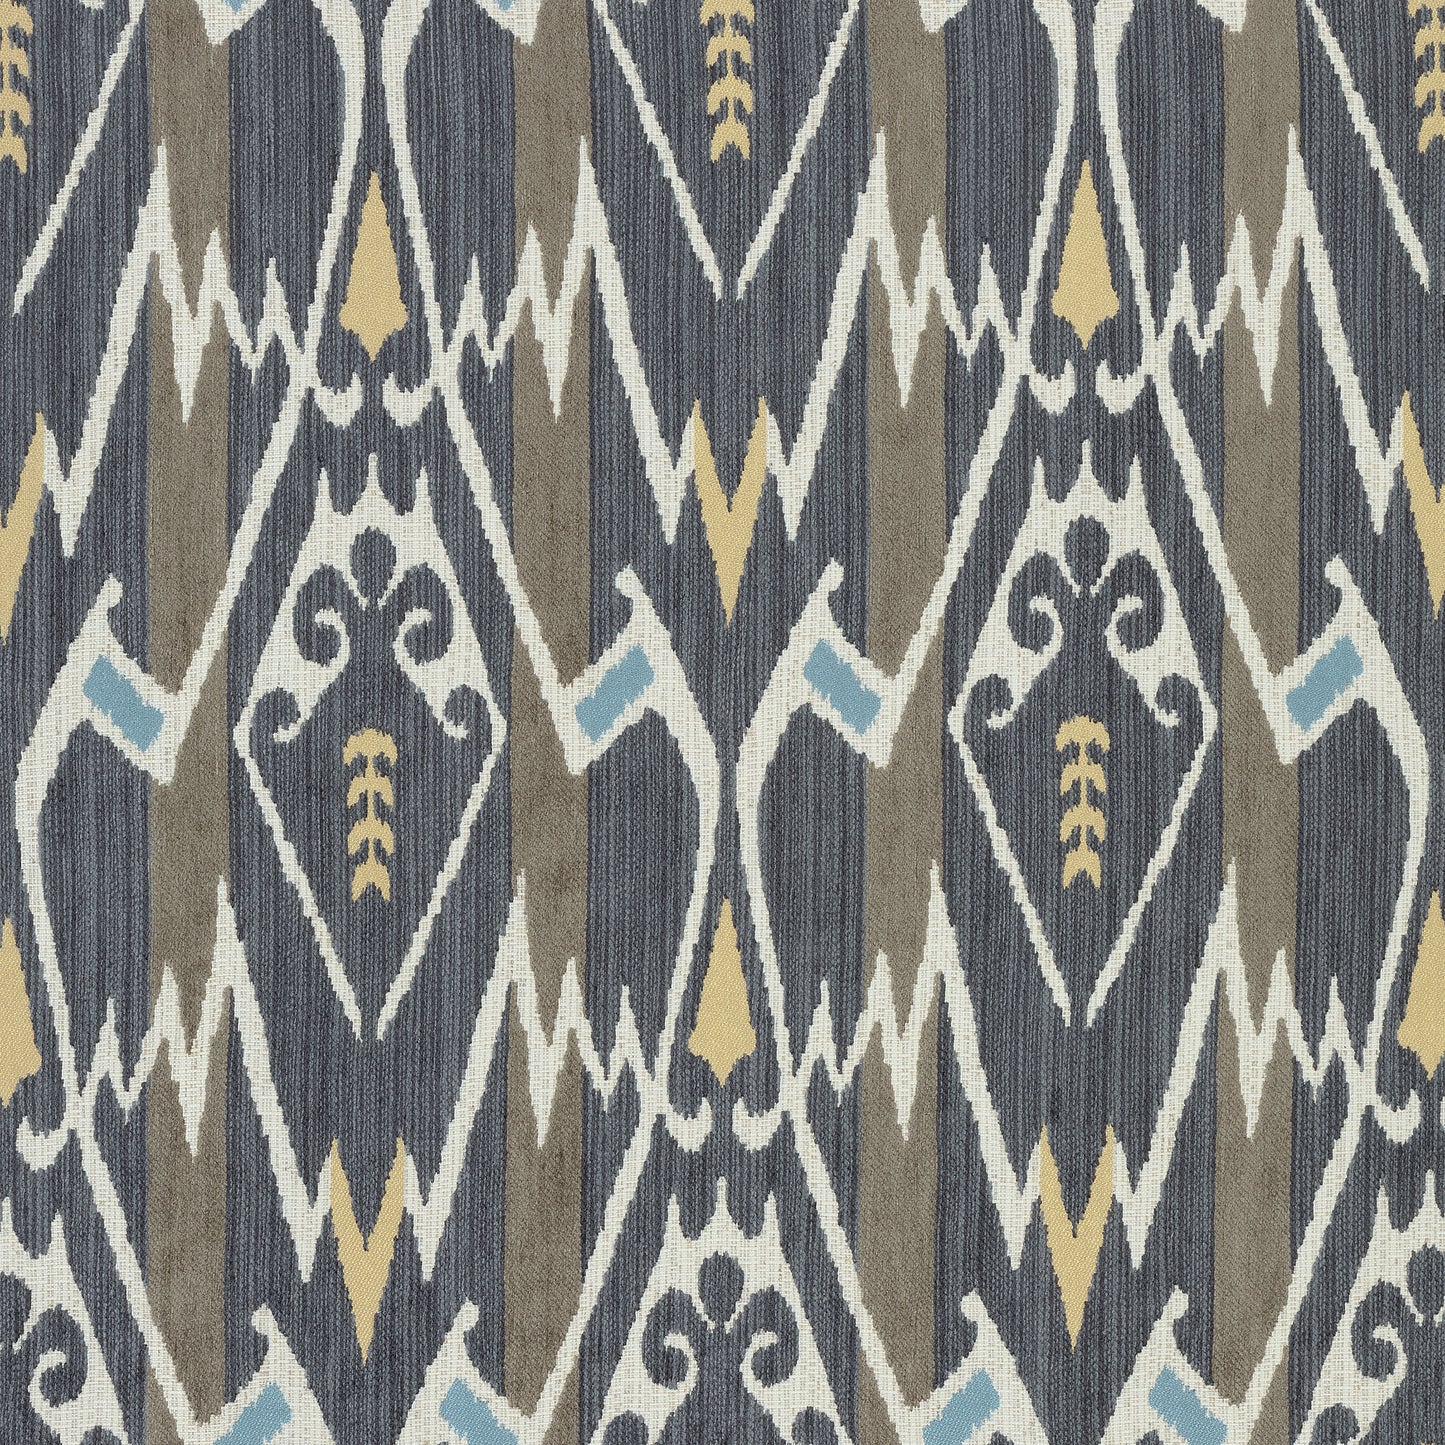 Purchase Thibaut Fabric Pattern# W73366 pattern name Nomad color Black